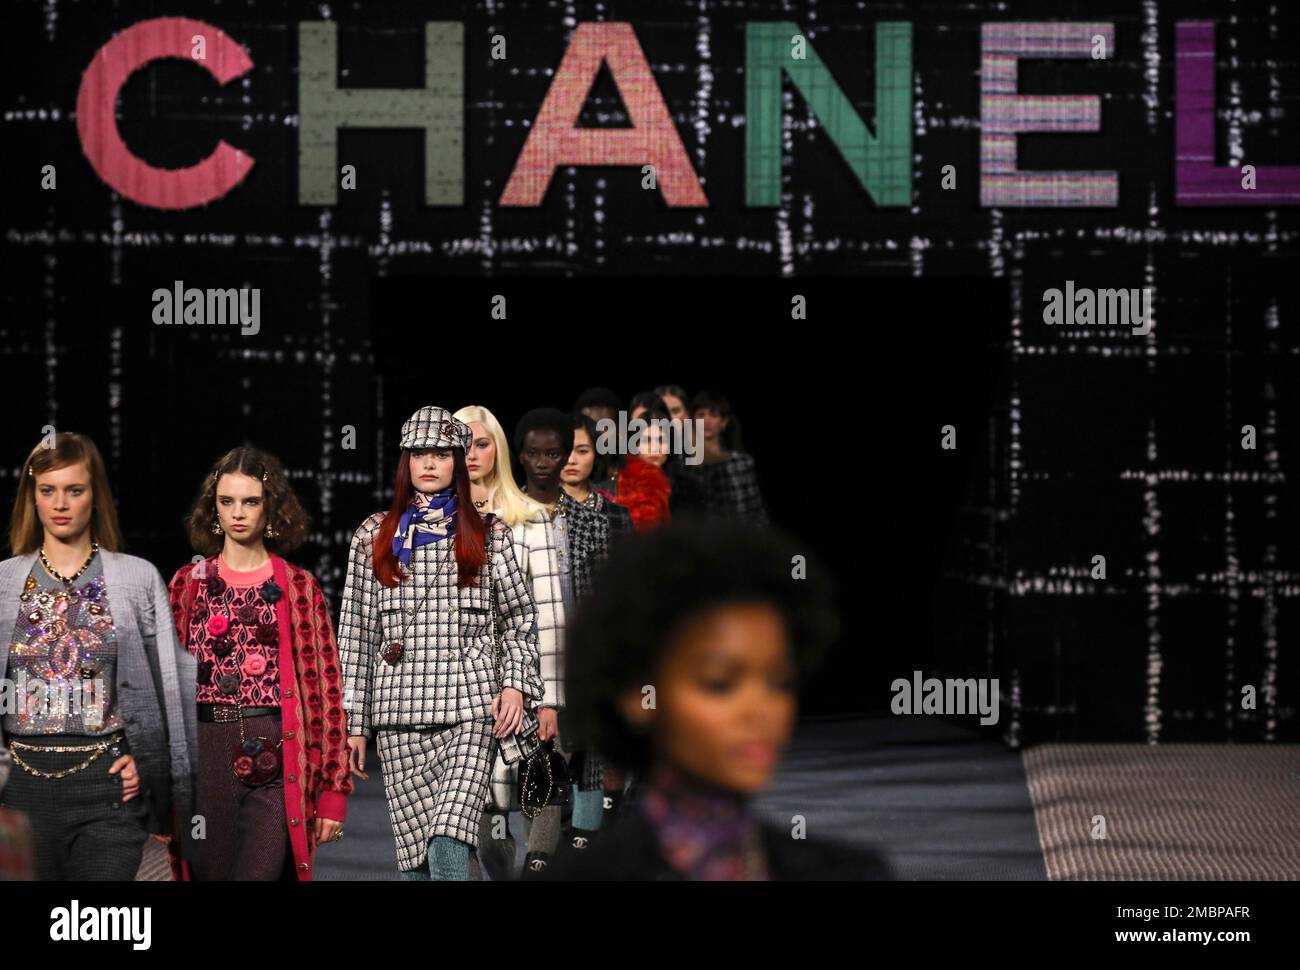 https://c8.alamy.com/comp/2MBPAFR/file-models-wear-creations-as-part-of-the-chanel-ready-to-wear-fallwinter-2022-2023-fashion-collection-unveiled-during-the-fashion-week-in-paris-on-march-8-2022-multibillion-dollar-french-high-fashion-brand-chanel-says-wednesday-april-6-2022-it-is-stopping-selling-its-clothes-perfumes-and-other-luxury-good-to-russian-customers-abroad-in-a-bold-response-to-moscows-invasion-of-ukraine-the-move-comes-already-after-the-house-had-shuttered-its-boutiques-in-the-russian-federation-in-provoking-ire-in-the-country-photo-by-vianney-le-caerinvisionap-file-2MBPAFR.jpg